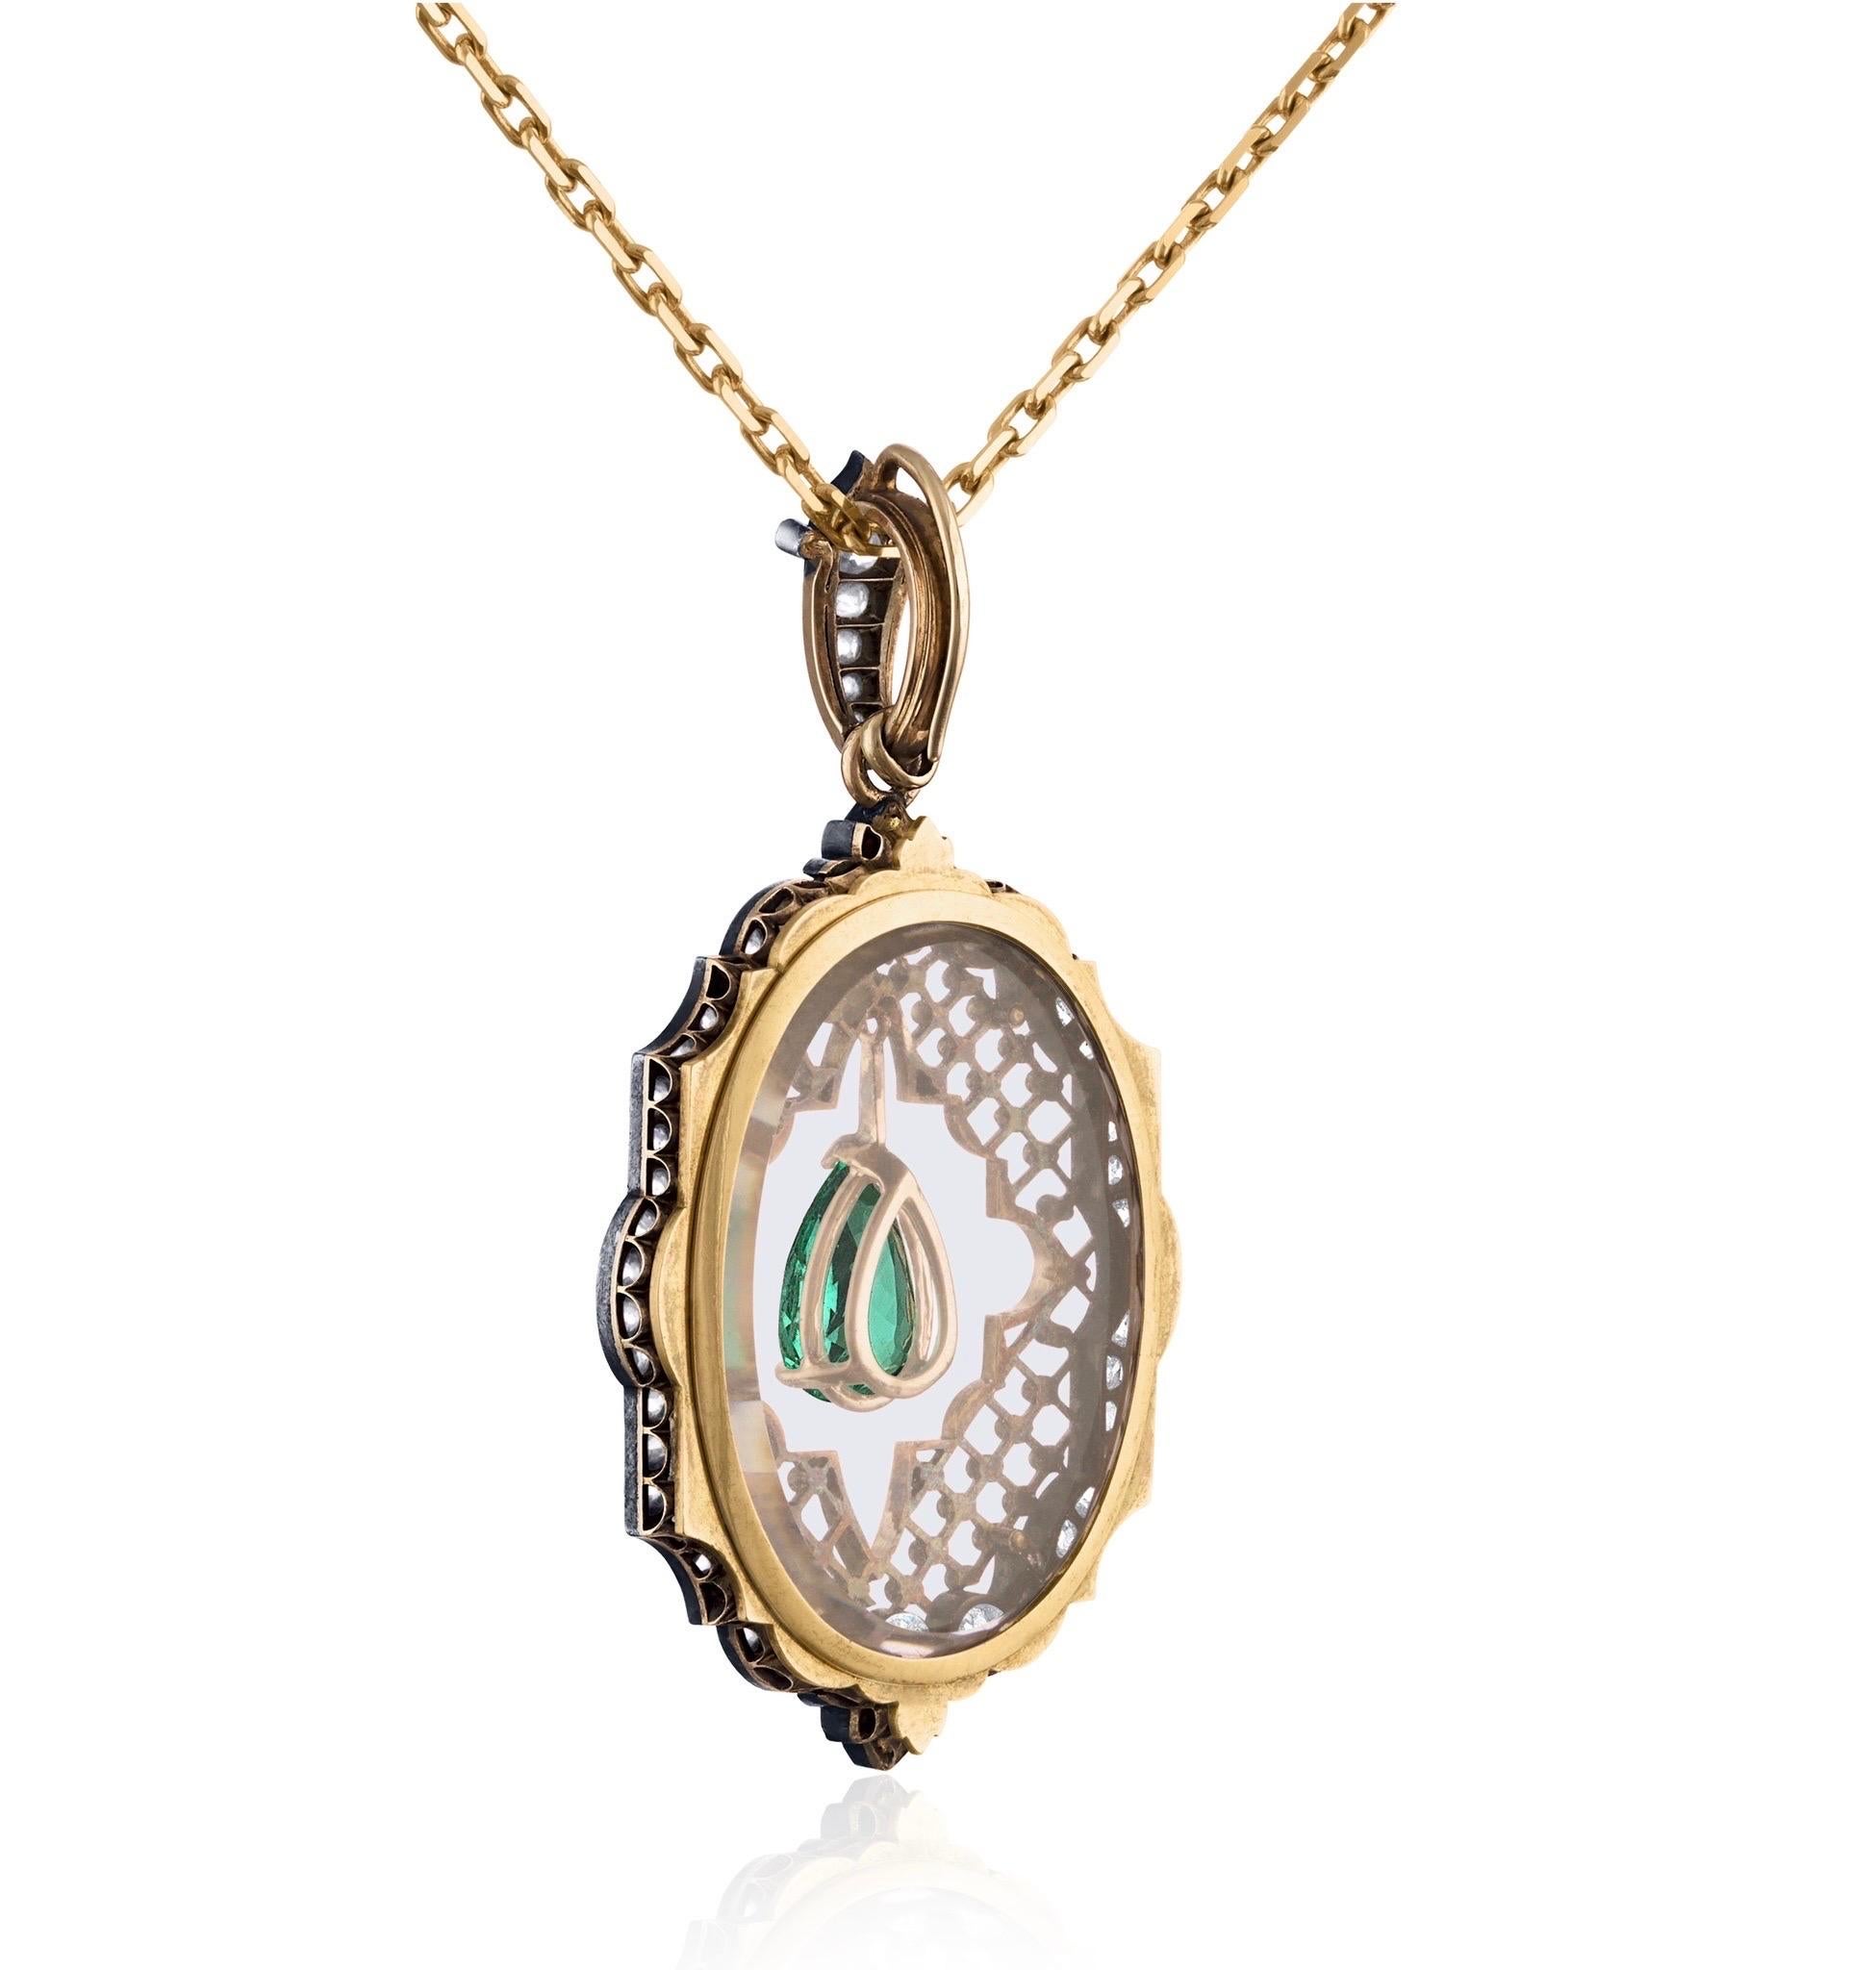 Some pieces of jewelry take our breath away. This one-of-a-kind Victorian pendant is our newest showstopper to the MMNY Reconceived Collection. Original Circa 1880’s has been updated for modern wear. The 2.31 carat AGL certified Colombian Emerald